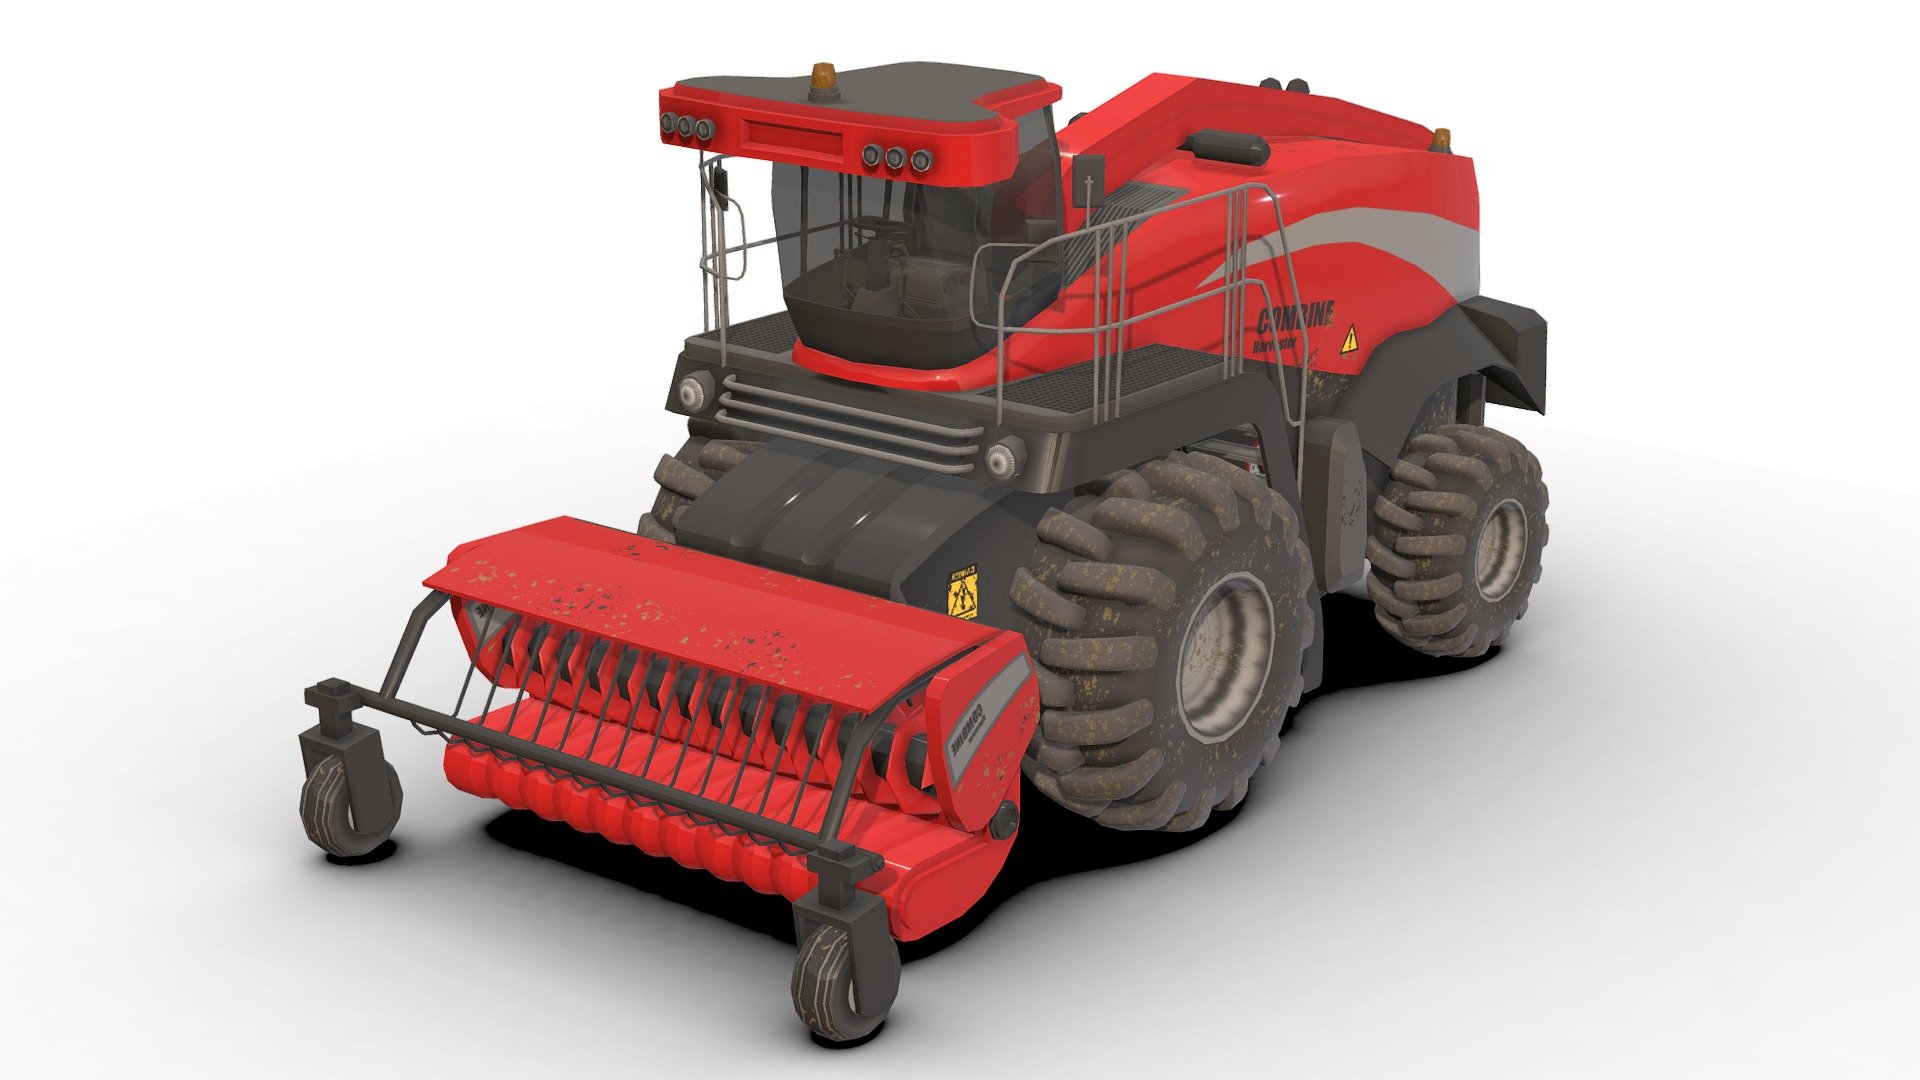 Combine Truck Model .

You can use these models in any game and project.

This model is made with order and precision.

Separated parts (bodys. wheels.Steer).

Very Low- Poly.

Truck have separate parts.

Average poly count: 23,000 tris.

Texture size: 2048 / 1024 (PNG).

Number of textures: 2.

Number of materials: 3.

Format: Fbx / Obj / 3DMax .

Wait for my new models.. Your friend (Sidra) 3d model